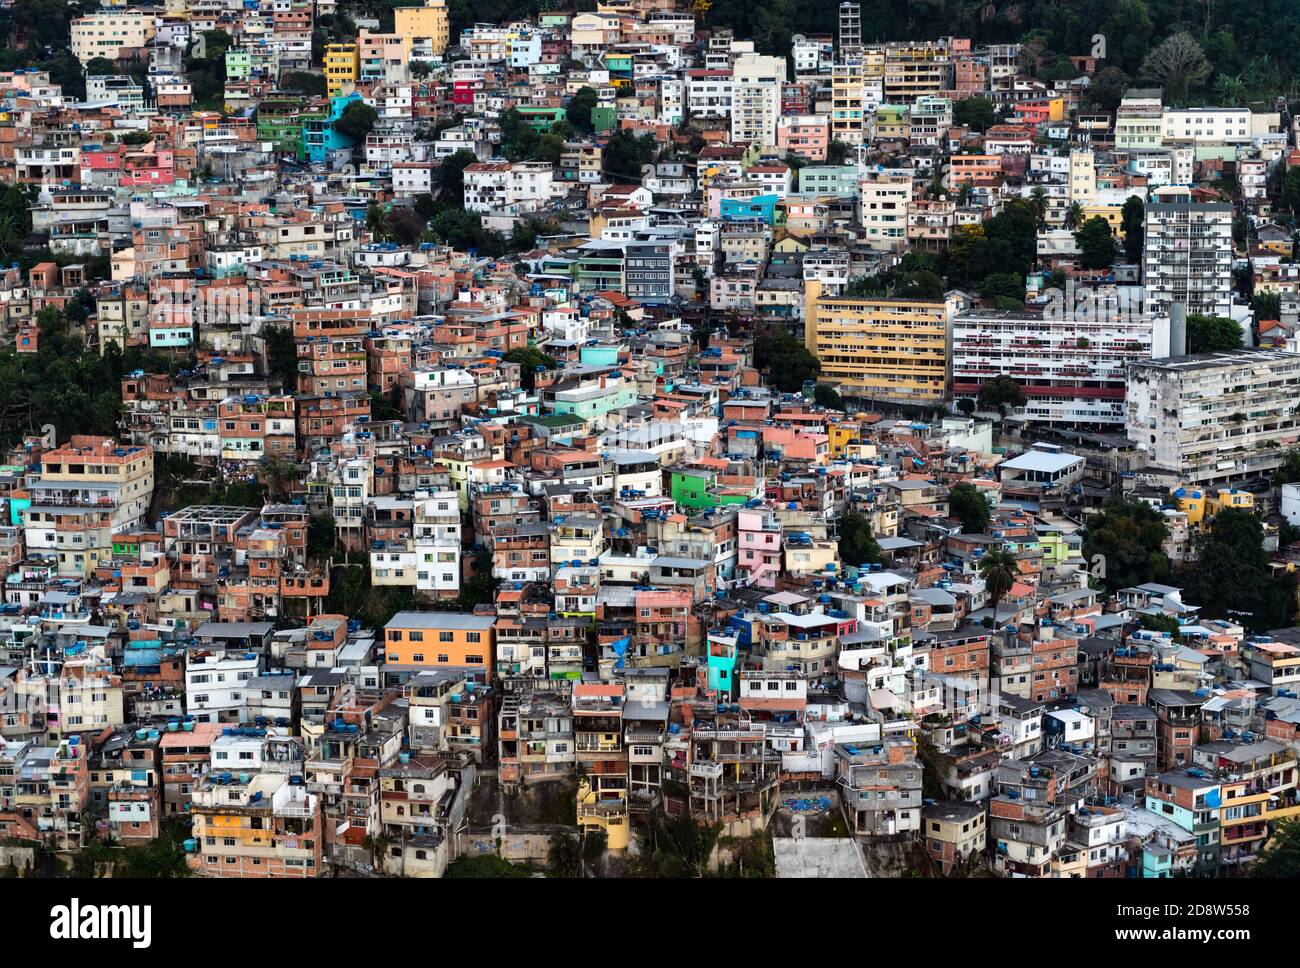 Favela Vidigal in Rio de Janeiro during sunset, aerial shot from a helicotper Stock Photo